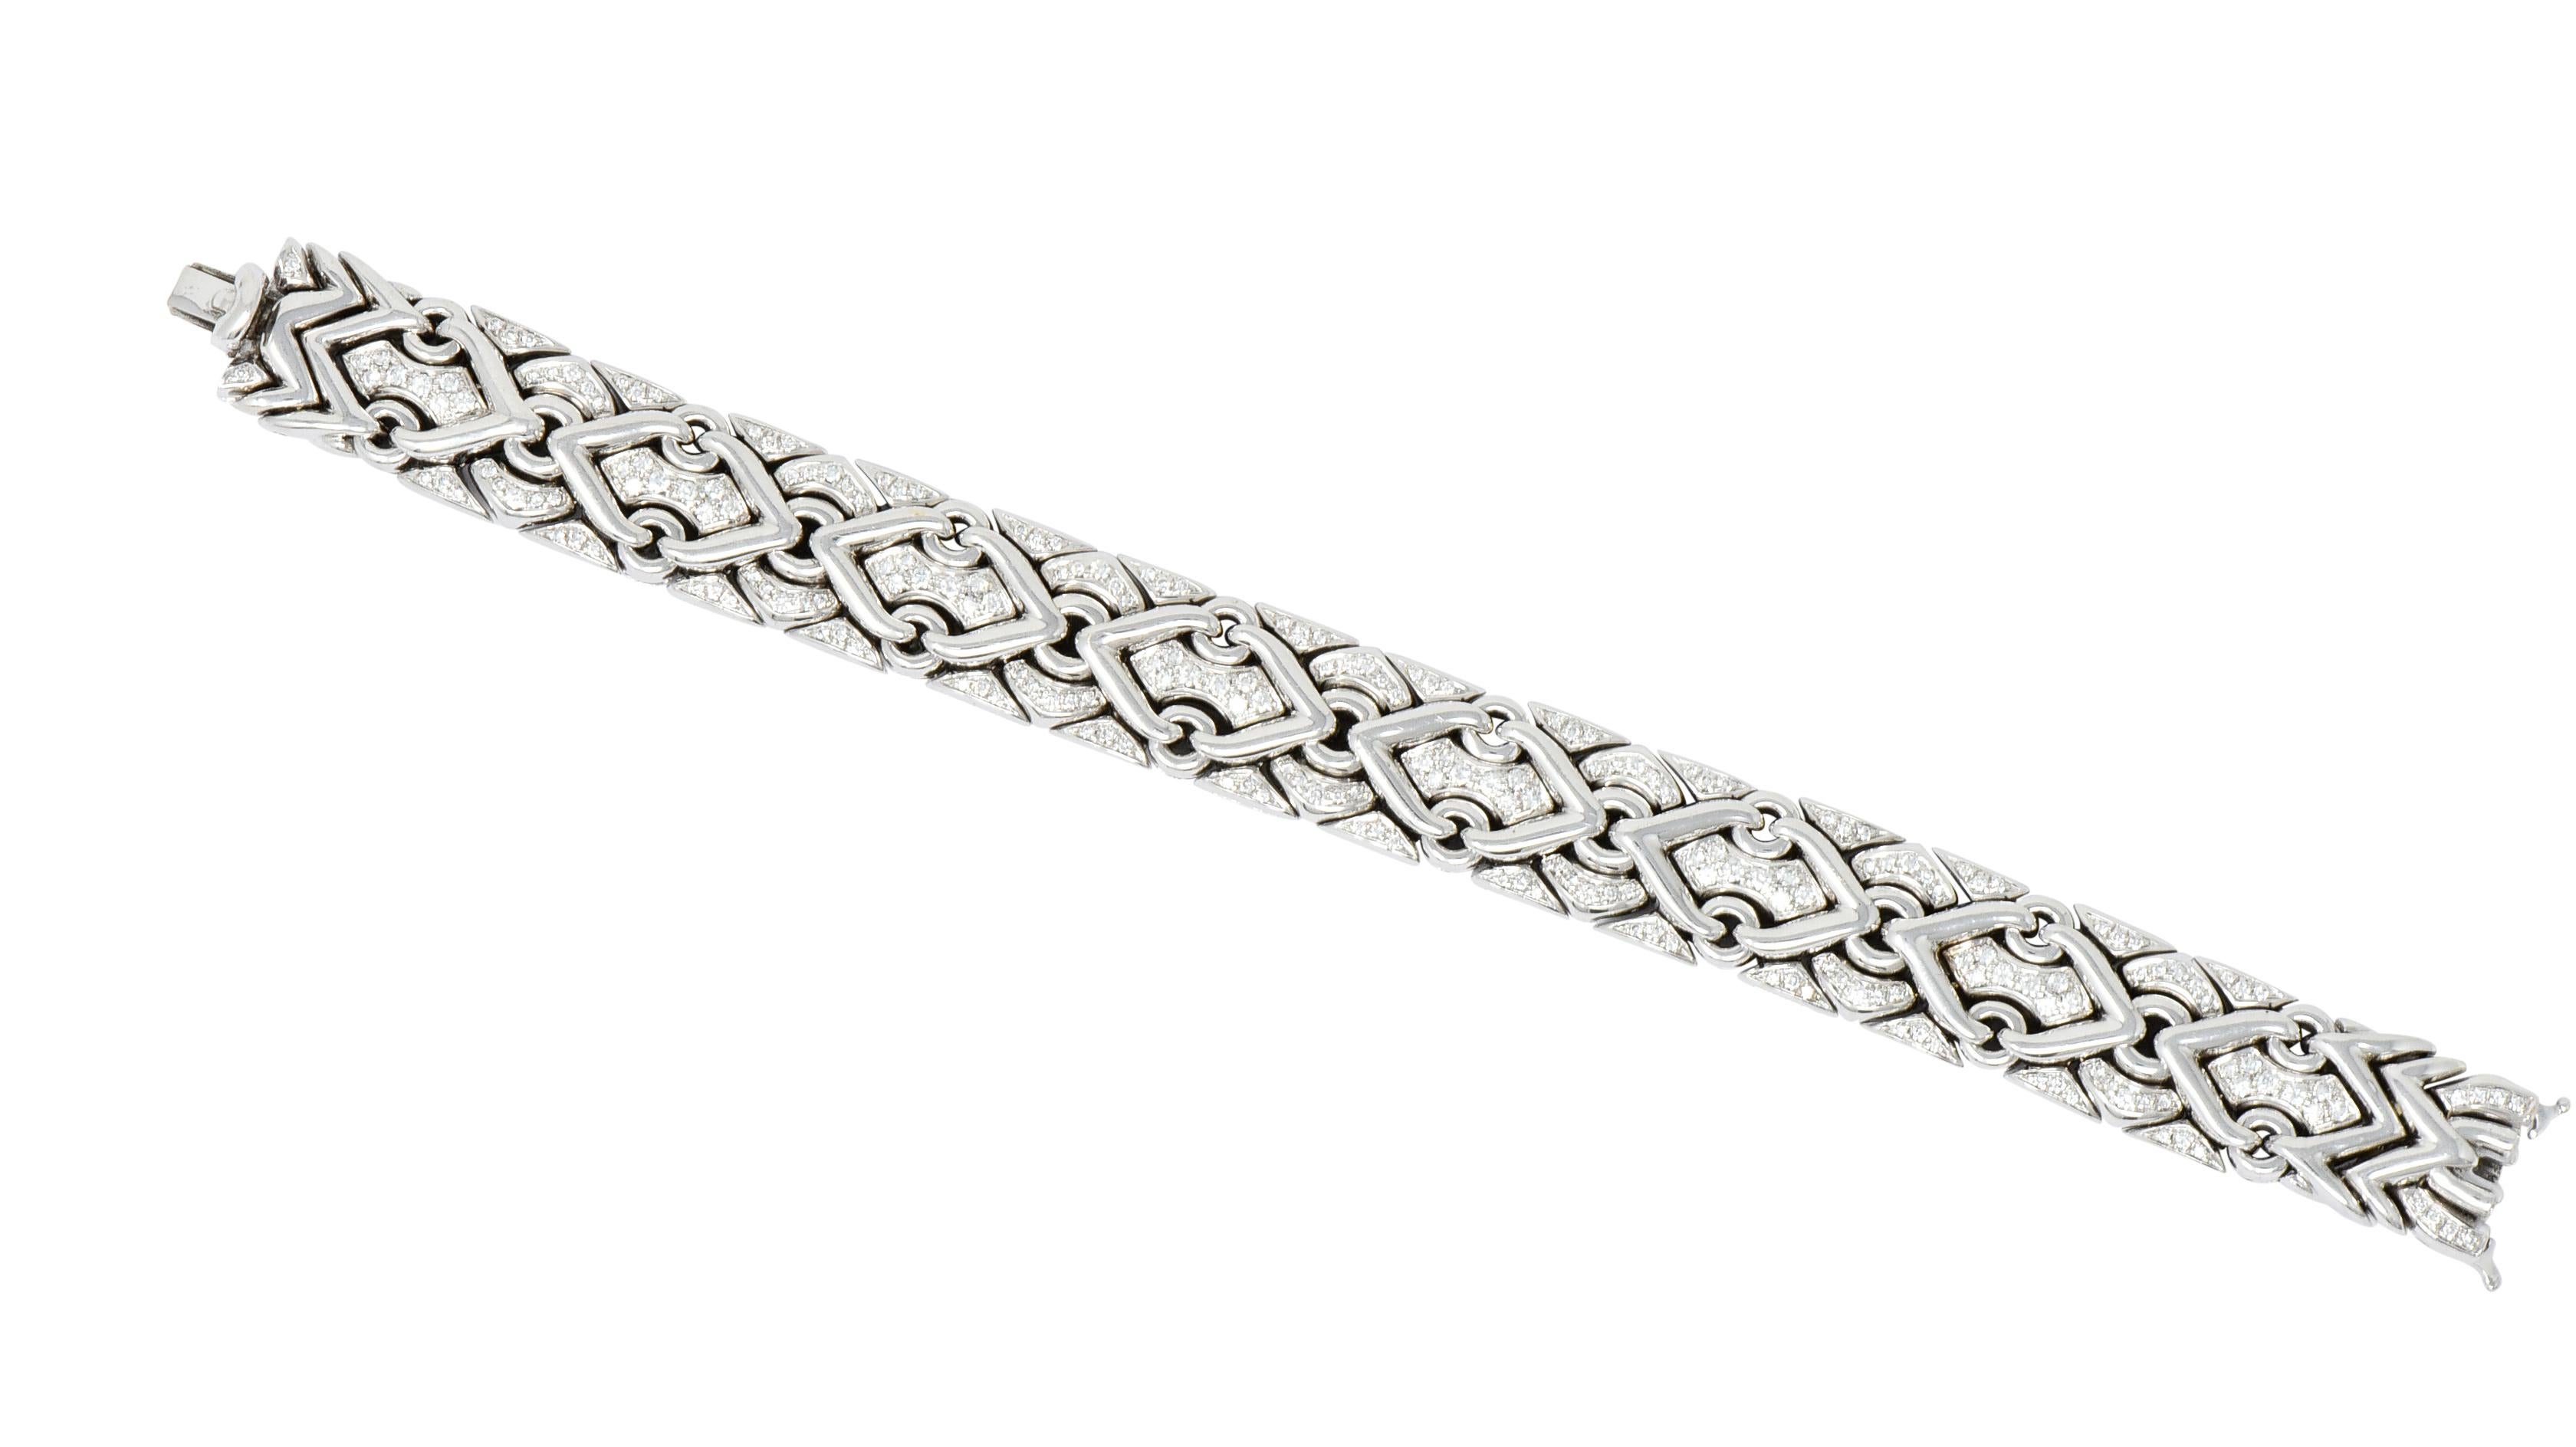 Link style bracelet featuring polished circle motif throughout, each connected by polished V motif

With rounded Moroccan style links, set throughout with round brilliant cut diamonds weighing approximately 2.40 carat total, G/H color and VS